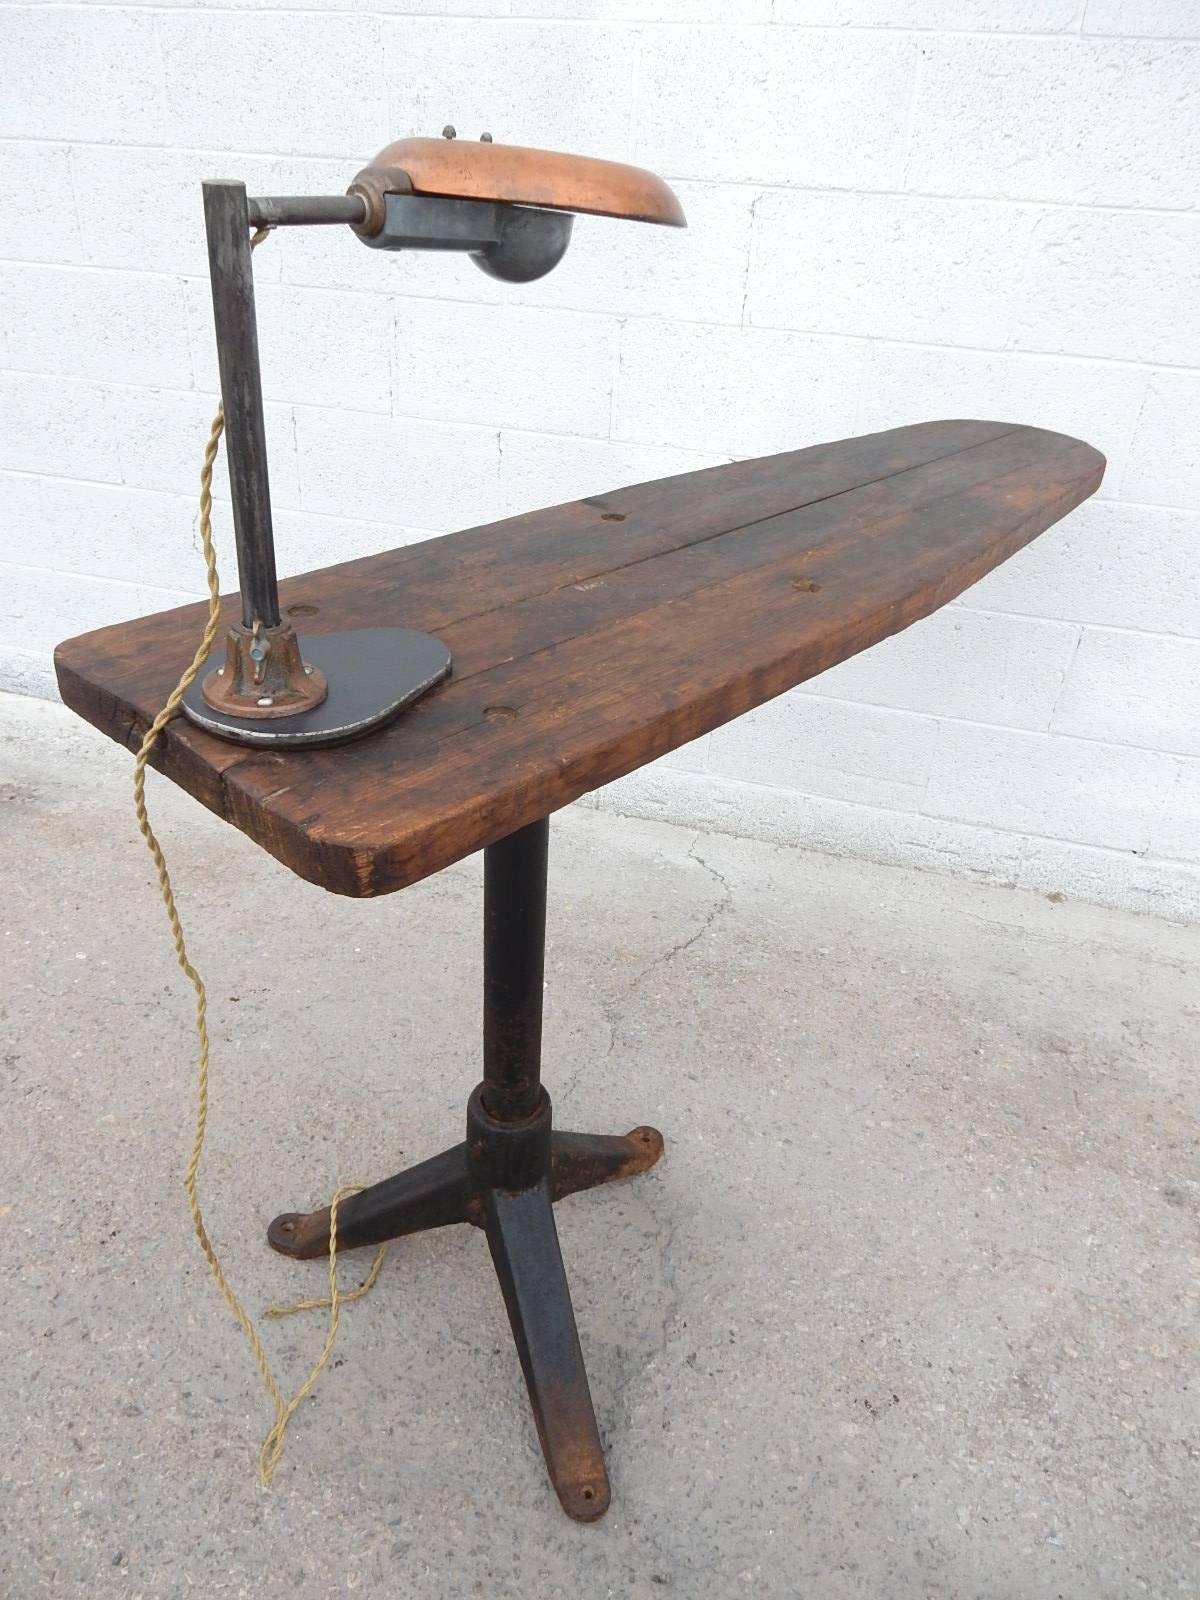 Unique Industrial era adjustable cantilever wood and iron work table with original Avant Garde inspection lamp.
From a tailors shop in the warehouse district of Kansas City, MO.
This set would be a perfect computer desk or console table. Lamp not